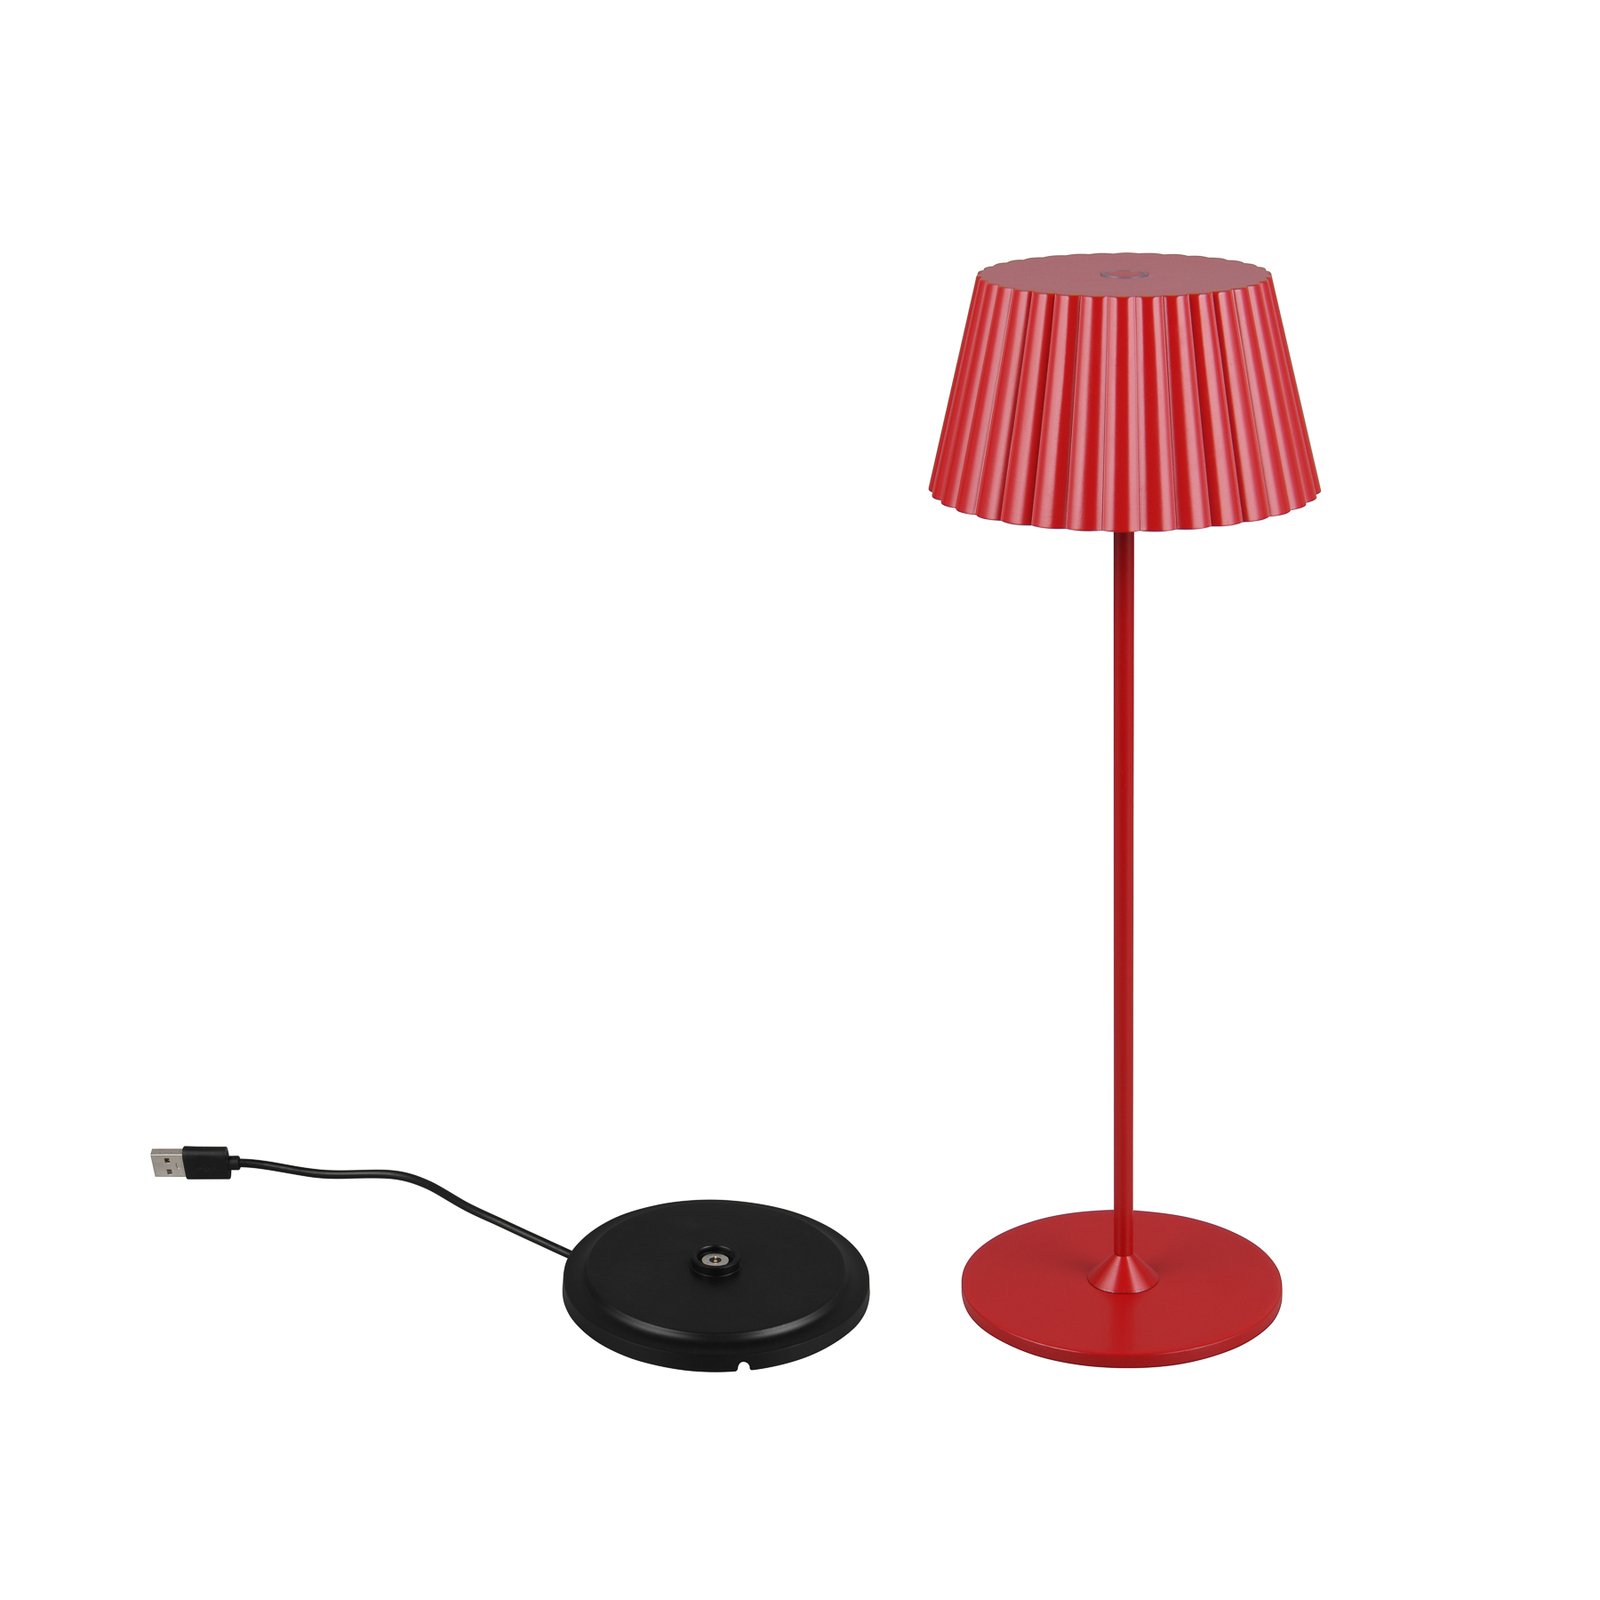 Suarez LED rechargeable table lamp, red, height 39 cm, metal, dimmable